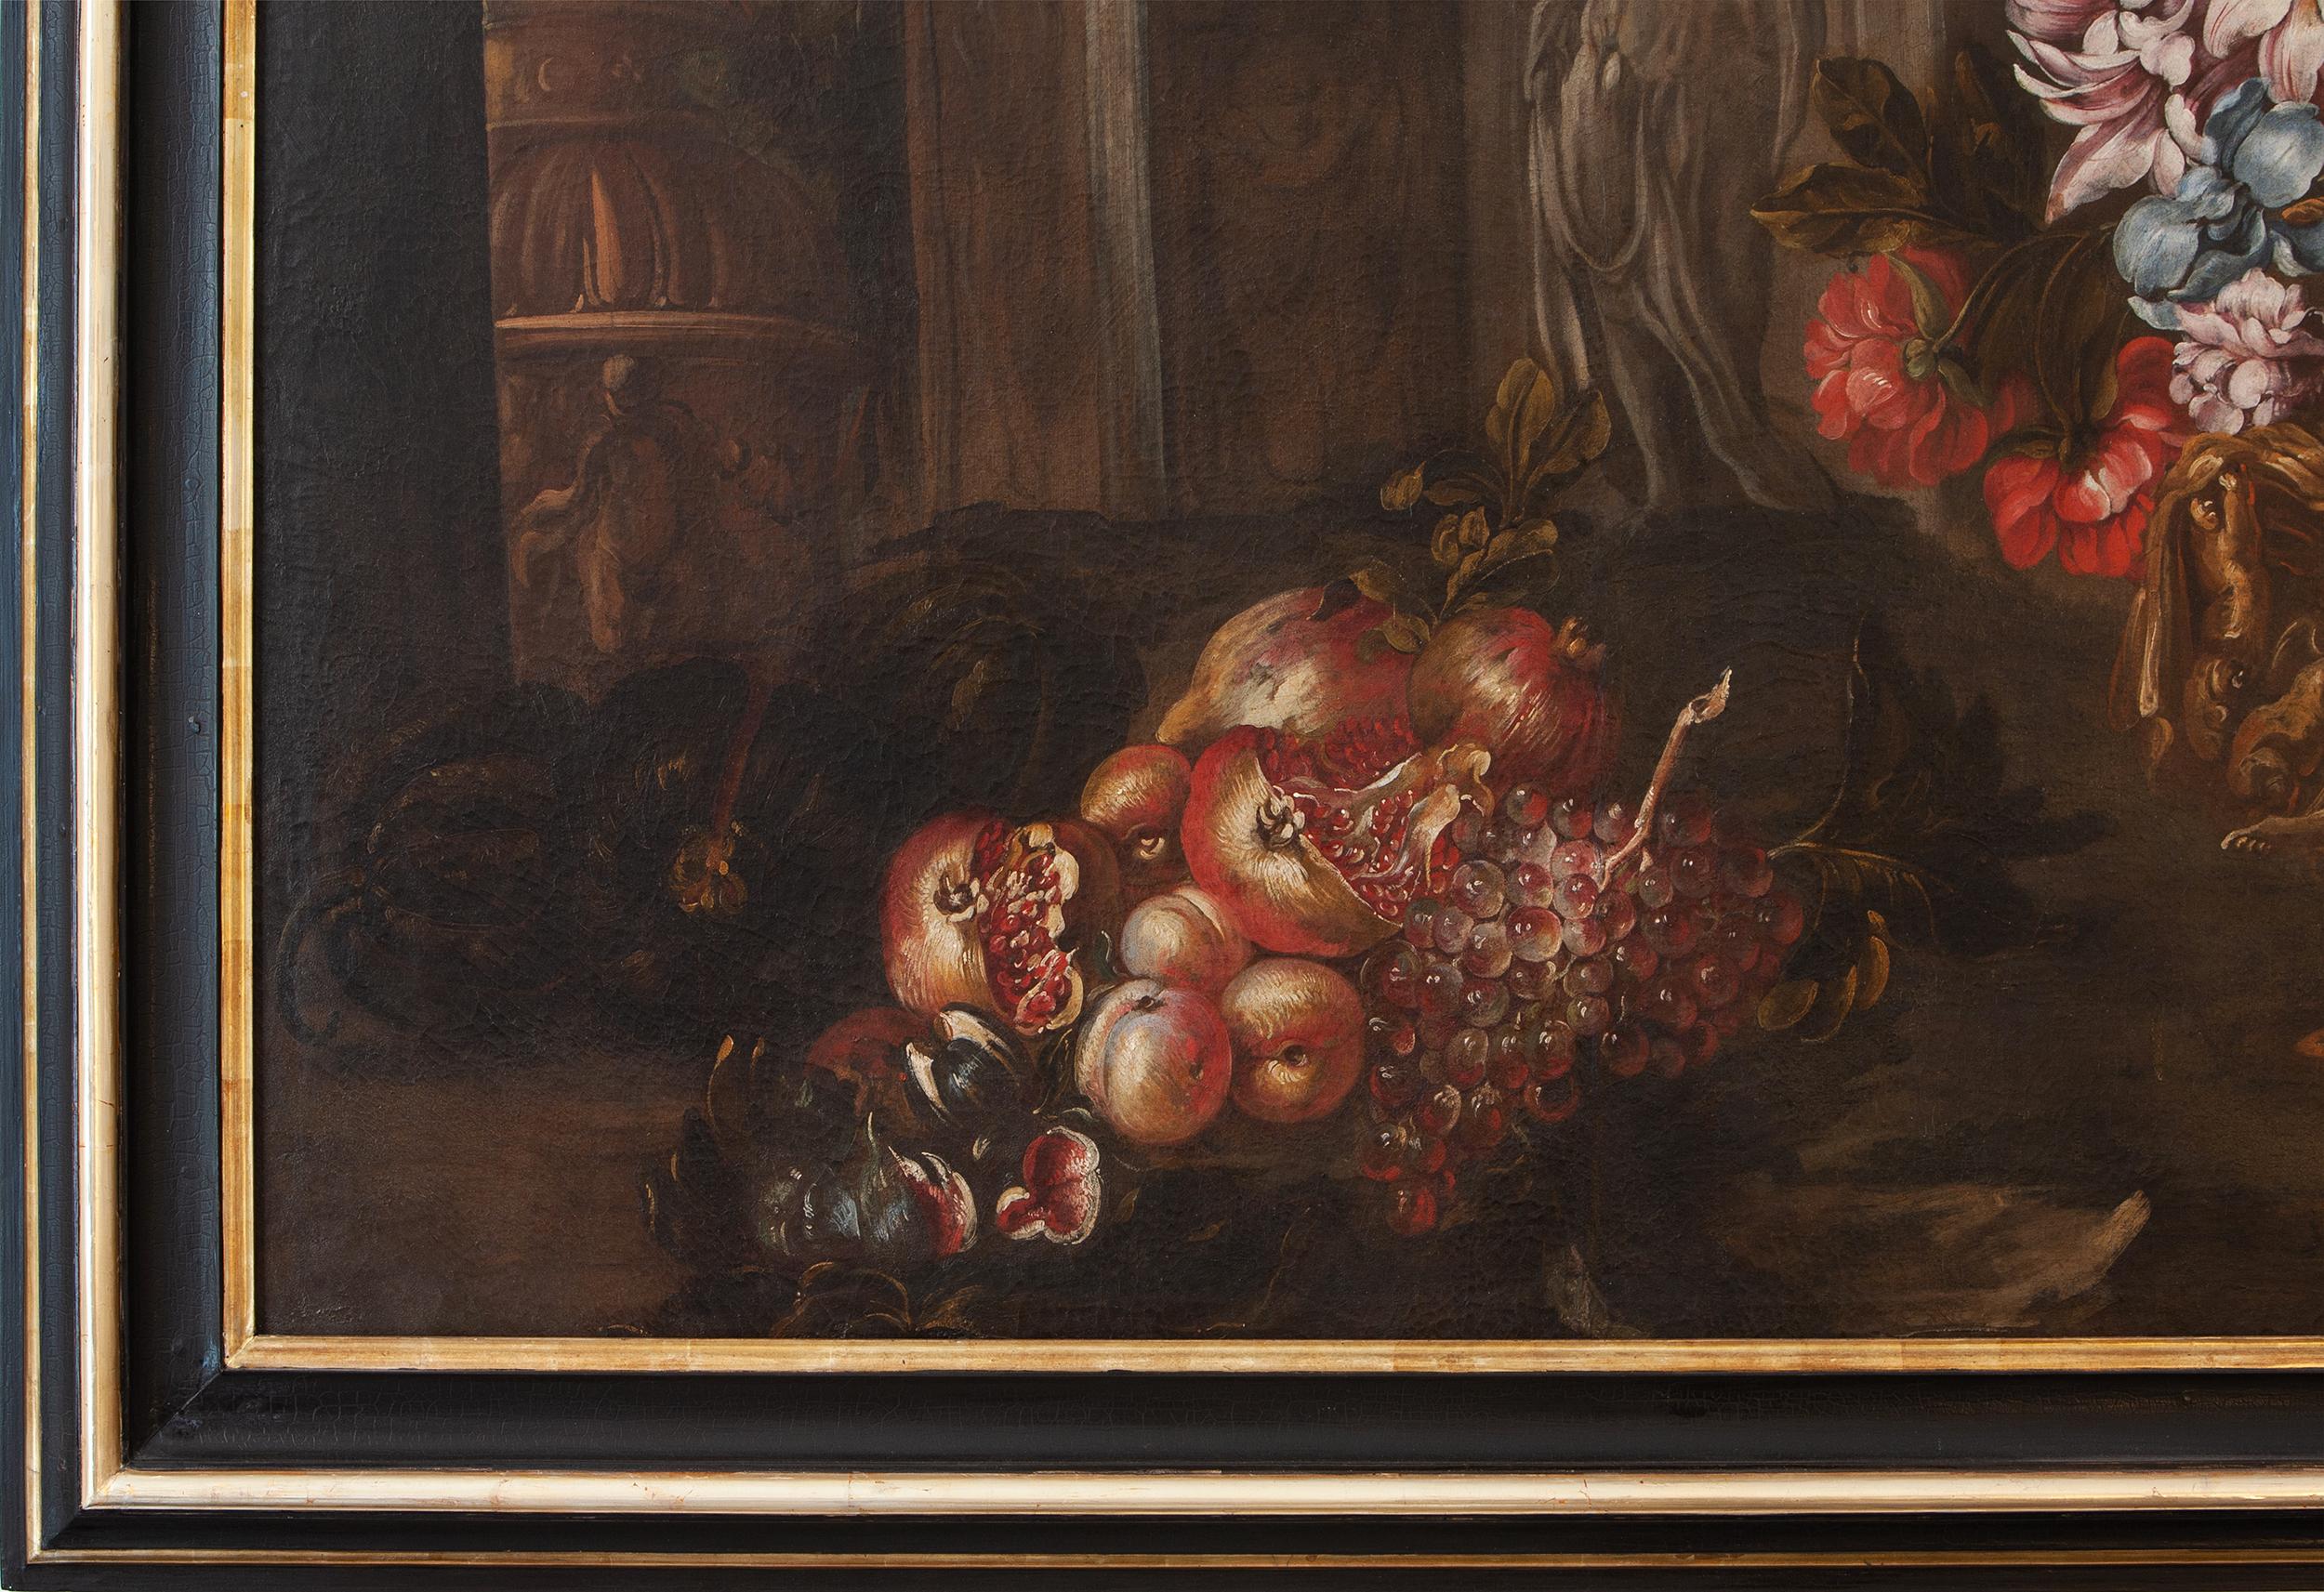 Still life with vase of flowers, fruits and architectural ruins  - Black Still-Life Painting by Unknown